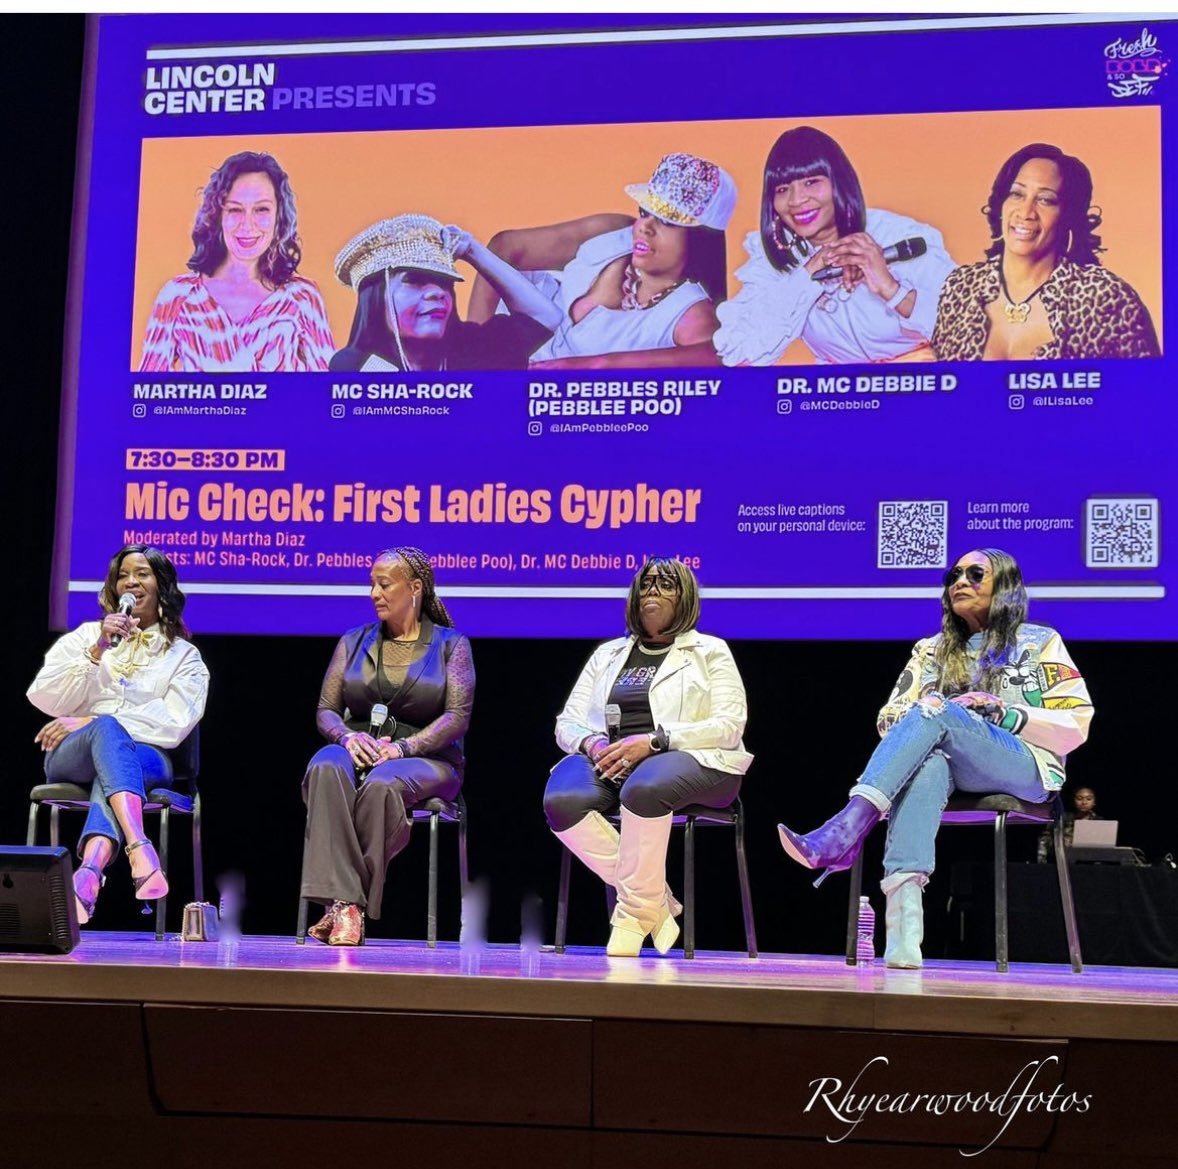 Hip Hop is celebrating 50 years and MCs Debbie D, Lisa Lee, Pebblee Poo & Sha Rock were there during its inception! Collectively, there is almost 200 yrs of hip hop history sitting on this stage! Imagine the wealth of info … #HipHopMatriarchs #ImAPioneer